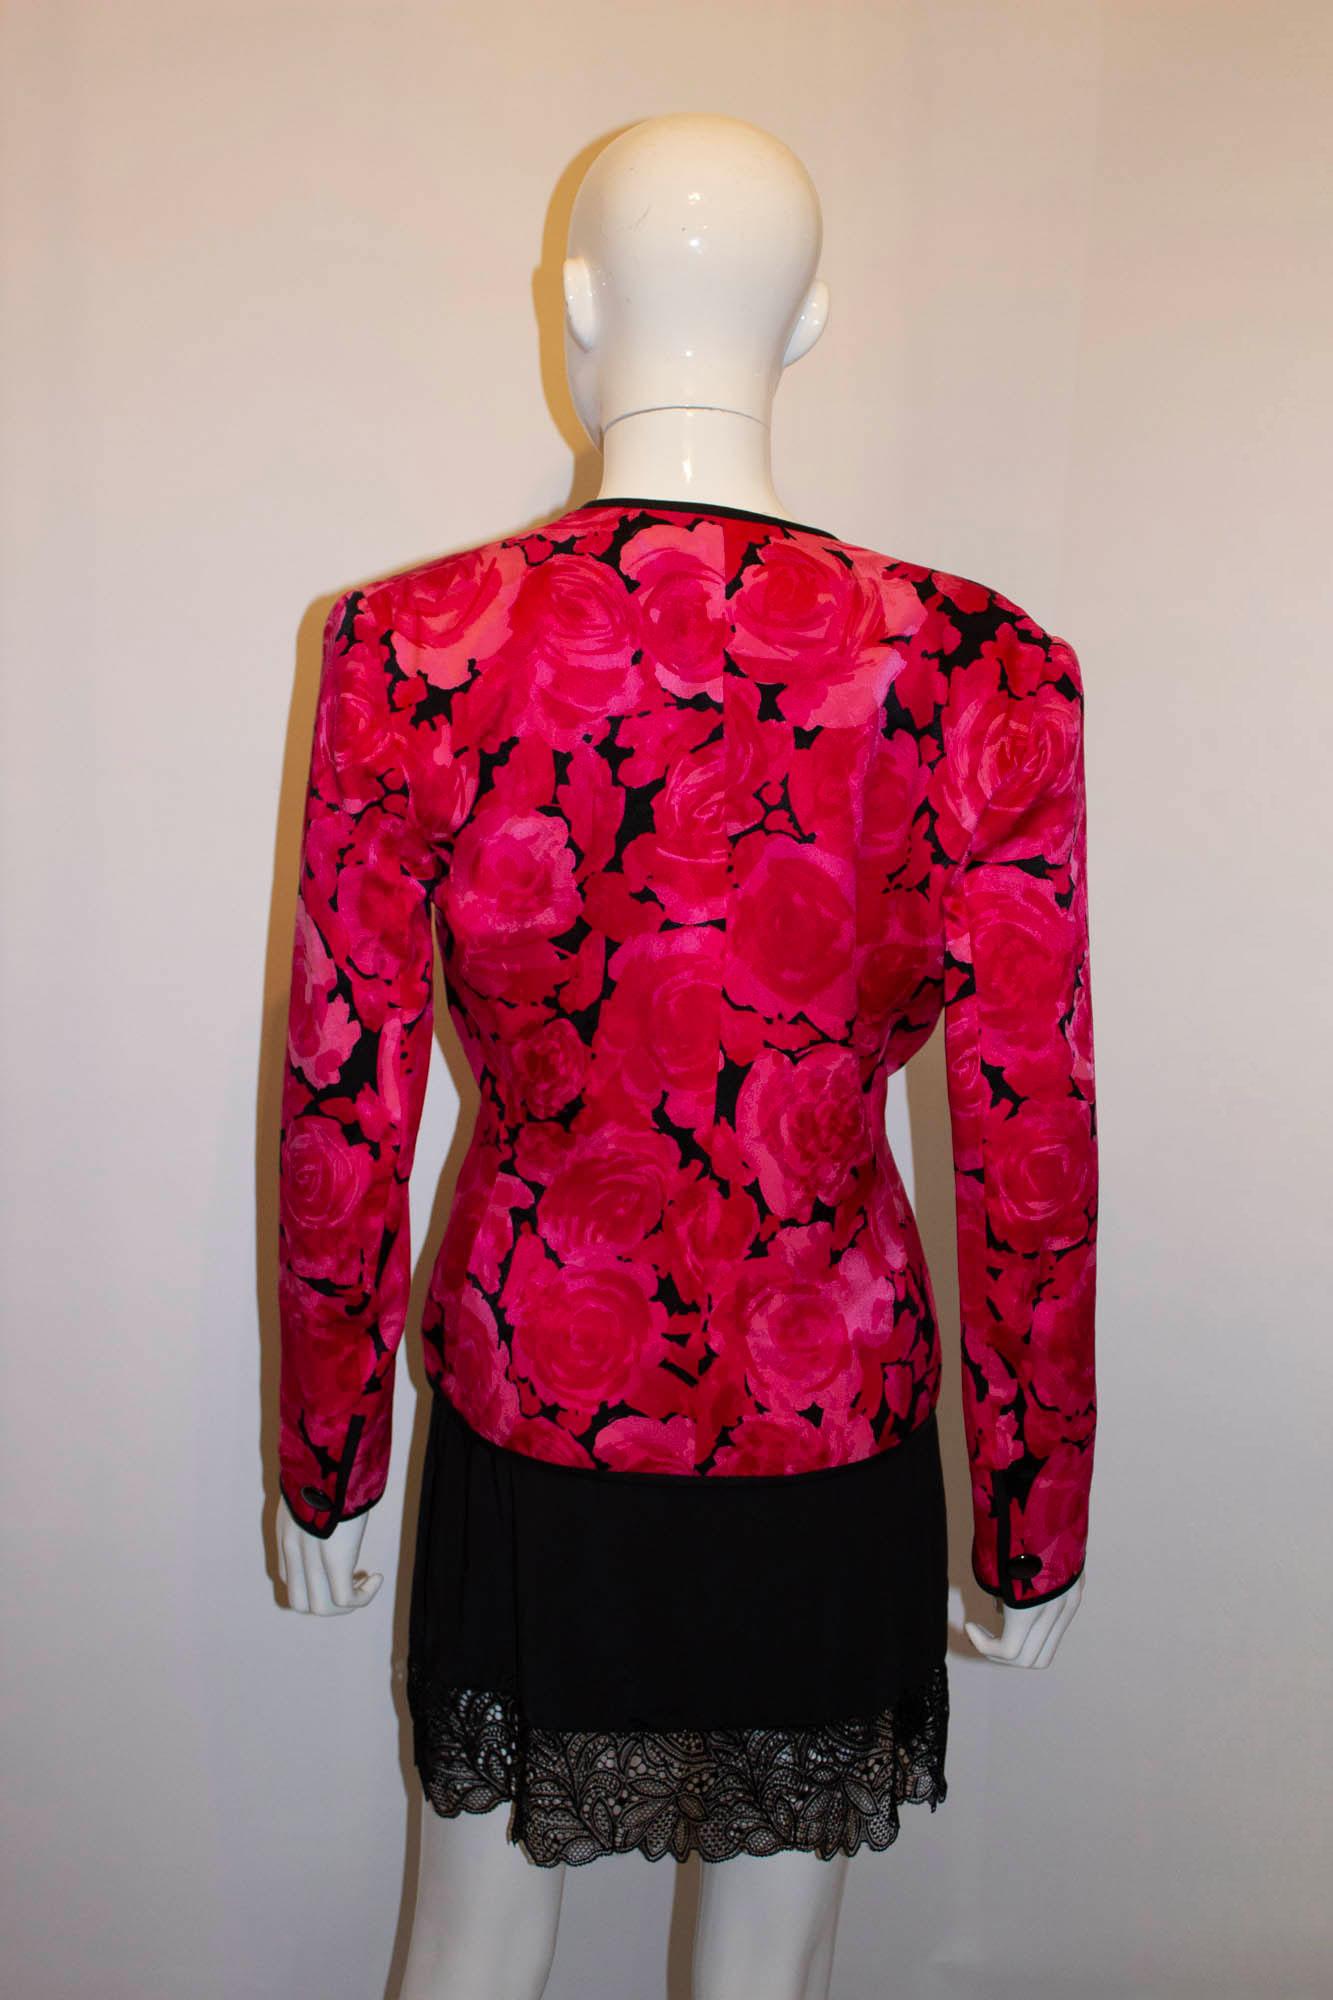 A headturning vintage silk jacket by Andrea Odicini. In a beautiful pink silk with floral design and black trim, the jacket is made so it can be reversible with the black silk inside. The jacket has a v neckline and great tailoring. Measurements: